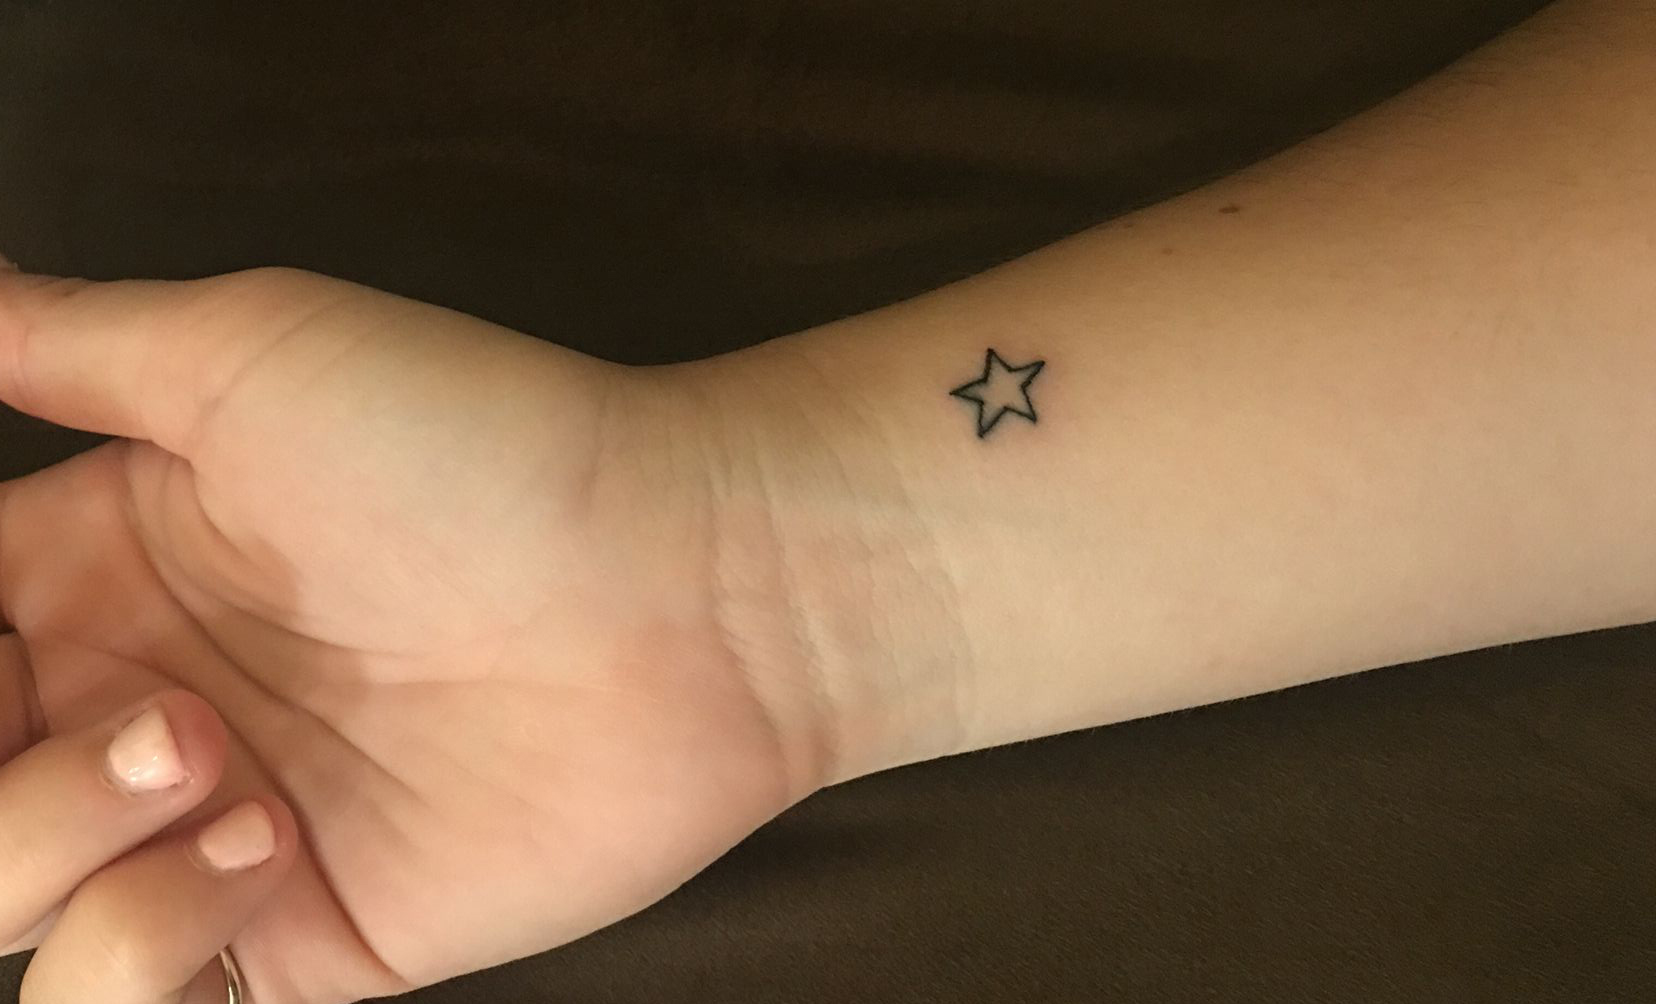 Small Star Tattoos on Arm - wide 9